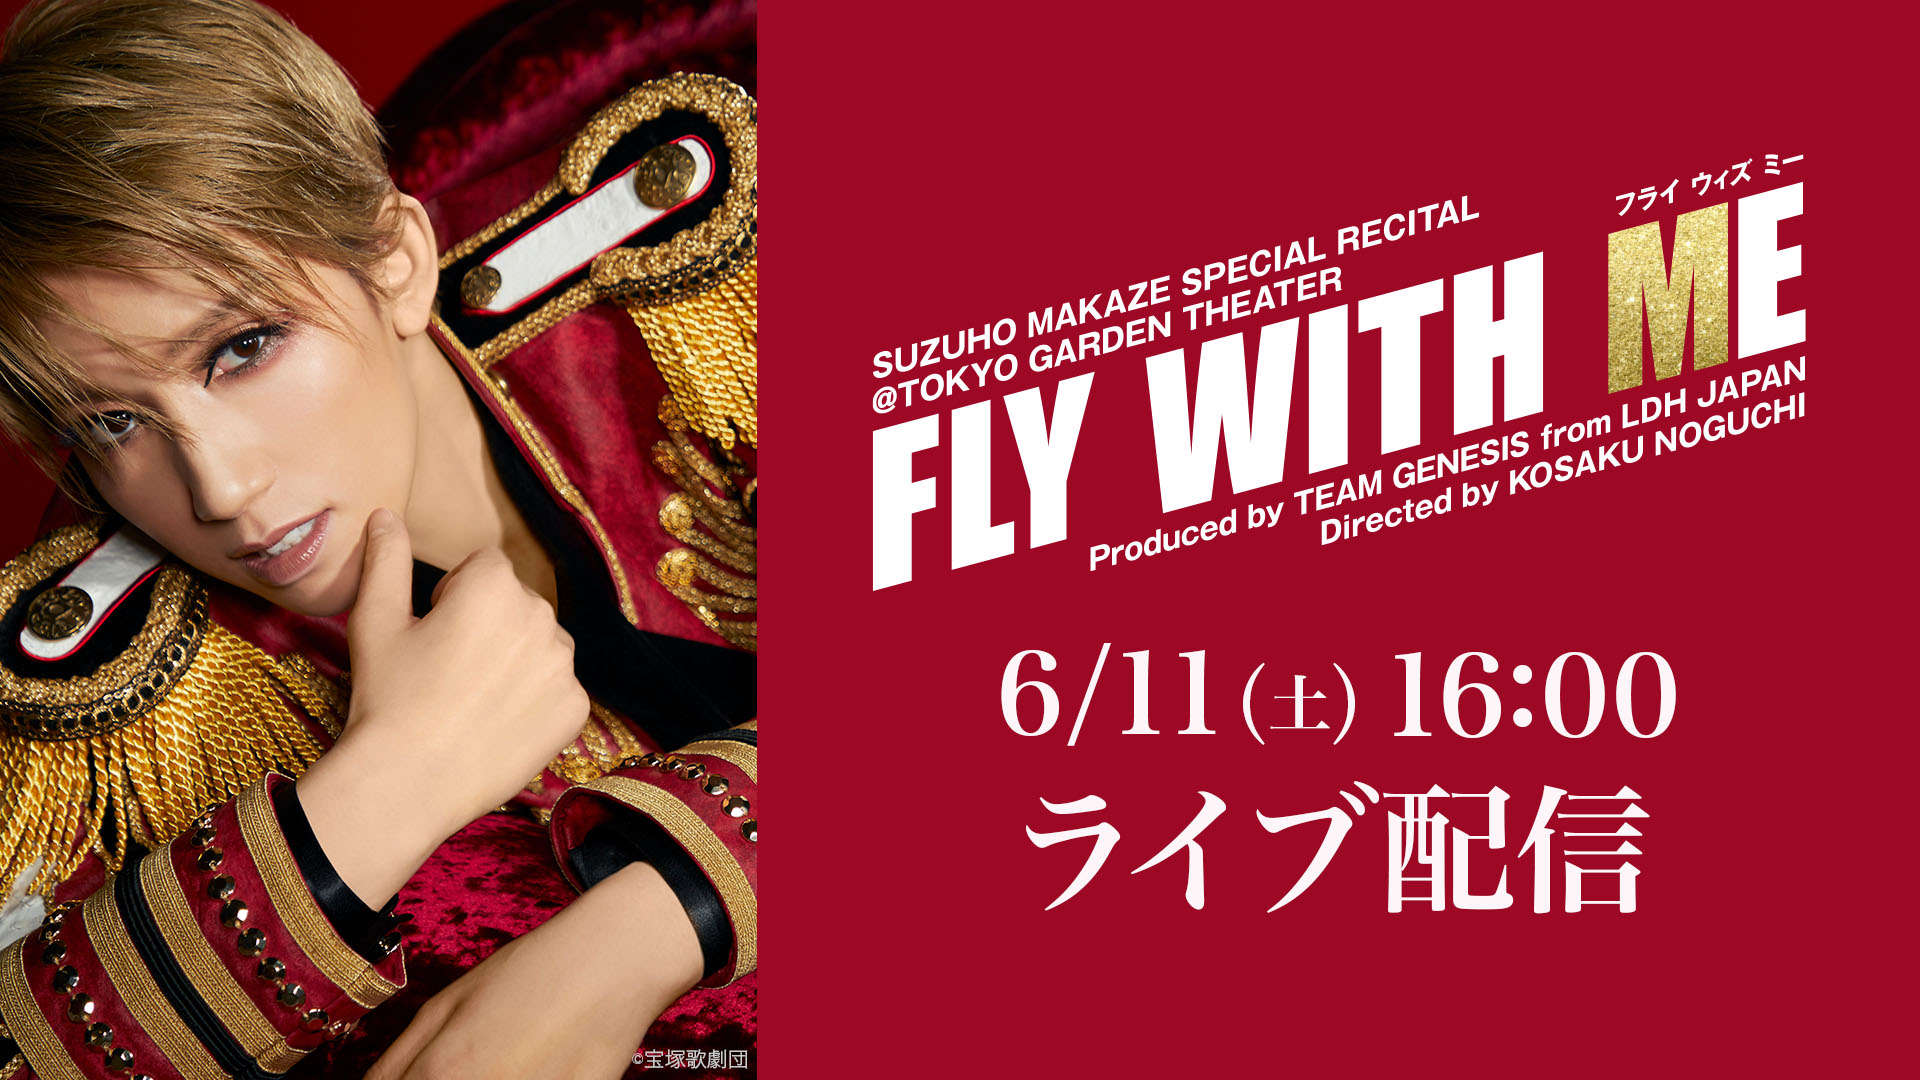 SUZUHO MAKAZE SPECIAL RECITAL @TOKYO GARDEN THEATER 『FLY WITH ME（フライ ウィズ ミー）』